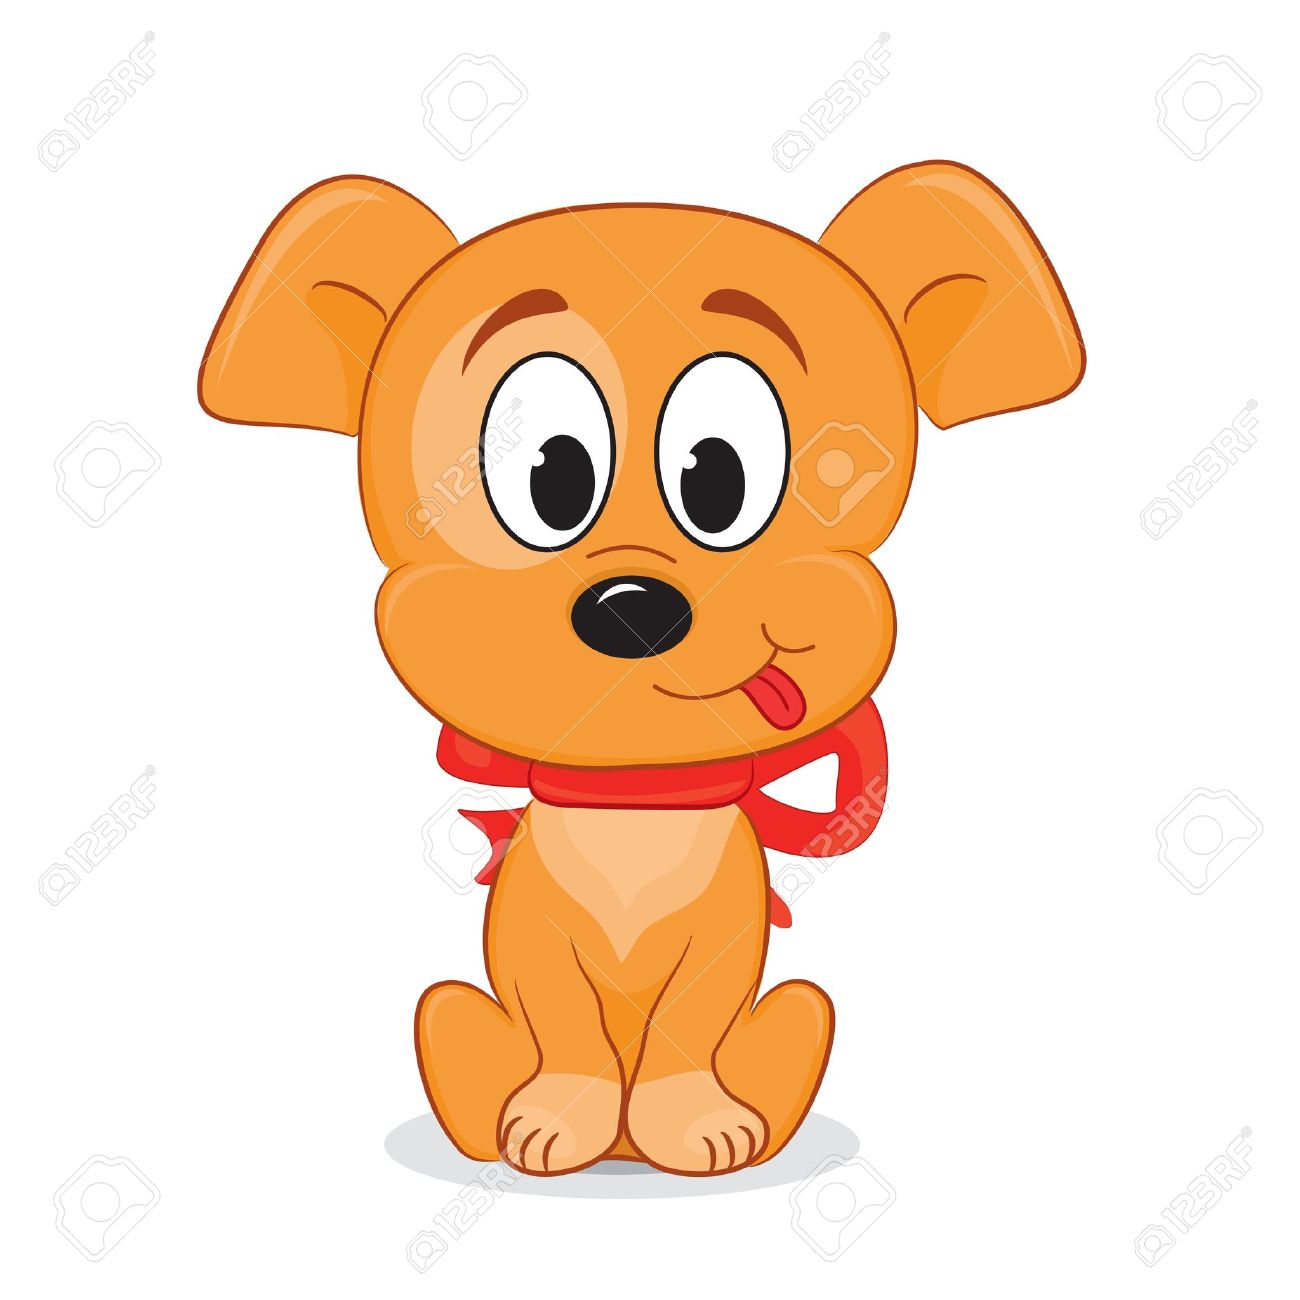 Cute Cartoon Dogs Pictures | Free download on ClipArtMag